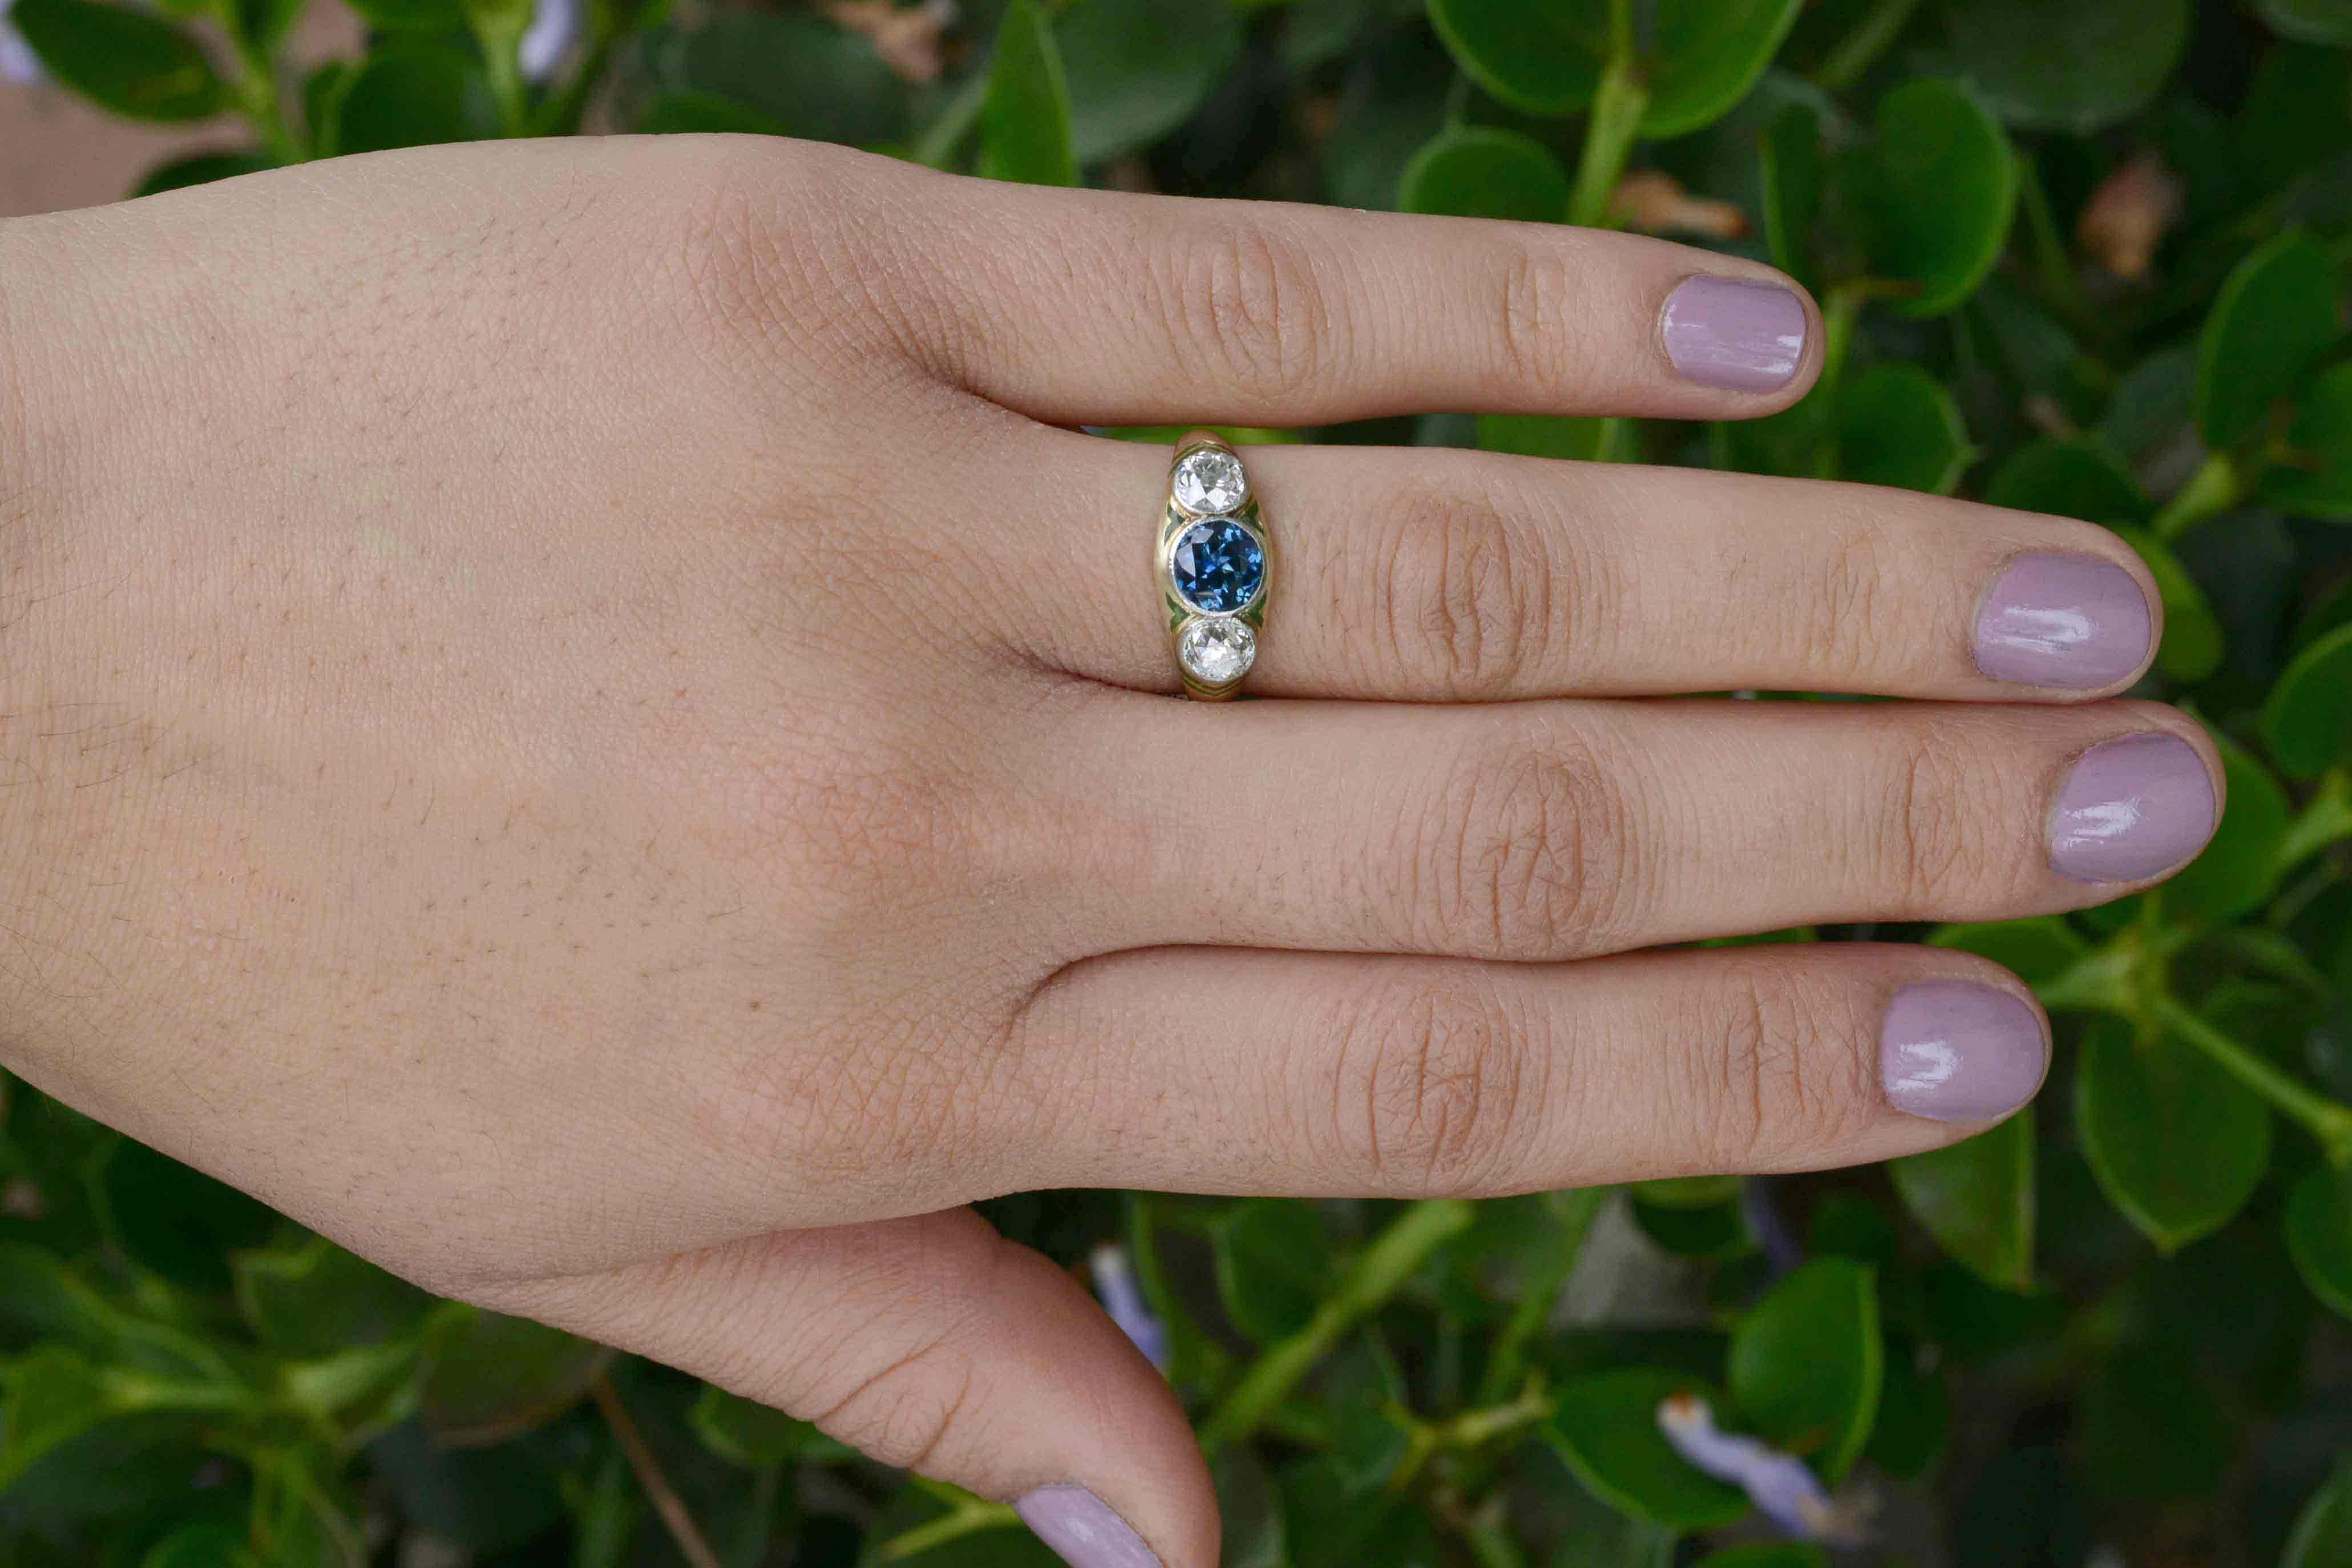 An absolutely enchanting 3 stone sapphire and diamond engagement ring. Dating to the early 1900s Art & Crafts period of the Art Nouveau era, this original antique trinity design boasts a wonderfully lustrous and vivid blue sapphire, flanked by a